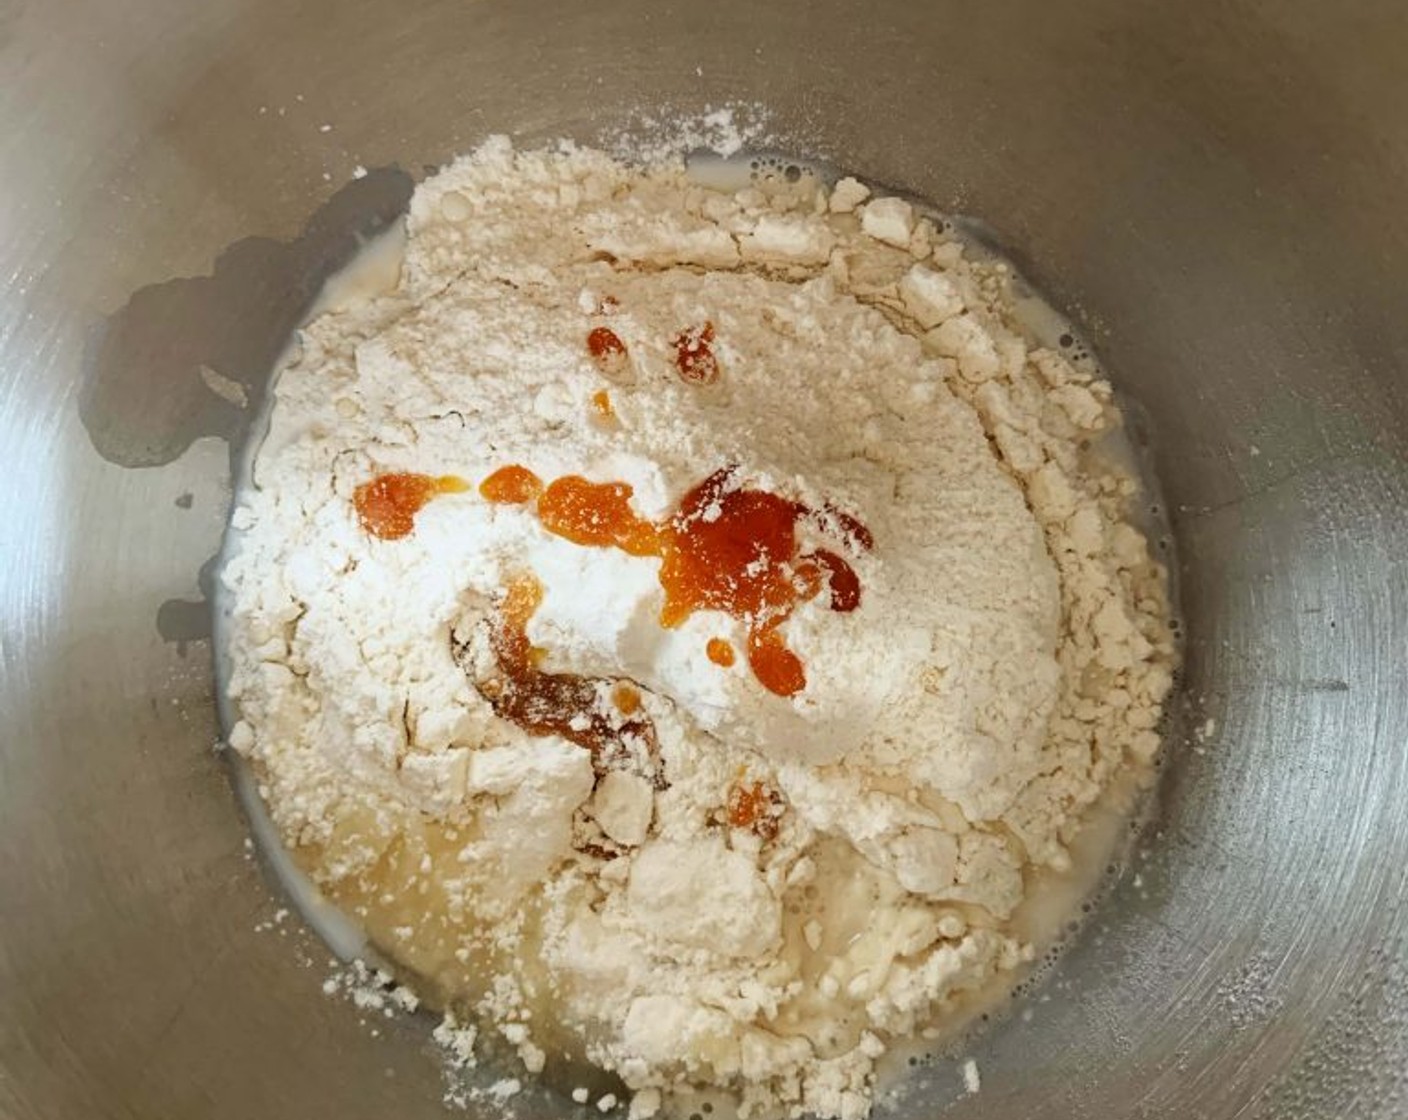 step 3 To the starter, add the remaining Type 00 Flour (2 1/3 cups), Water (1/4 cup), Oat Milk (1/4 cup), Fresh Yeast (1/2 Tbsp), Powdered Erythritol (3 Tbsp), and sugar-orange infuse and mix together.